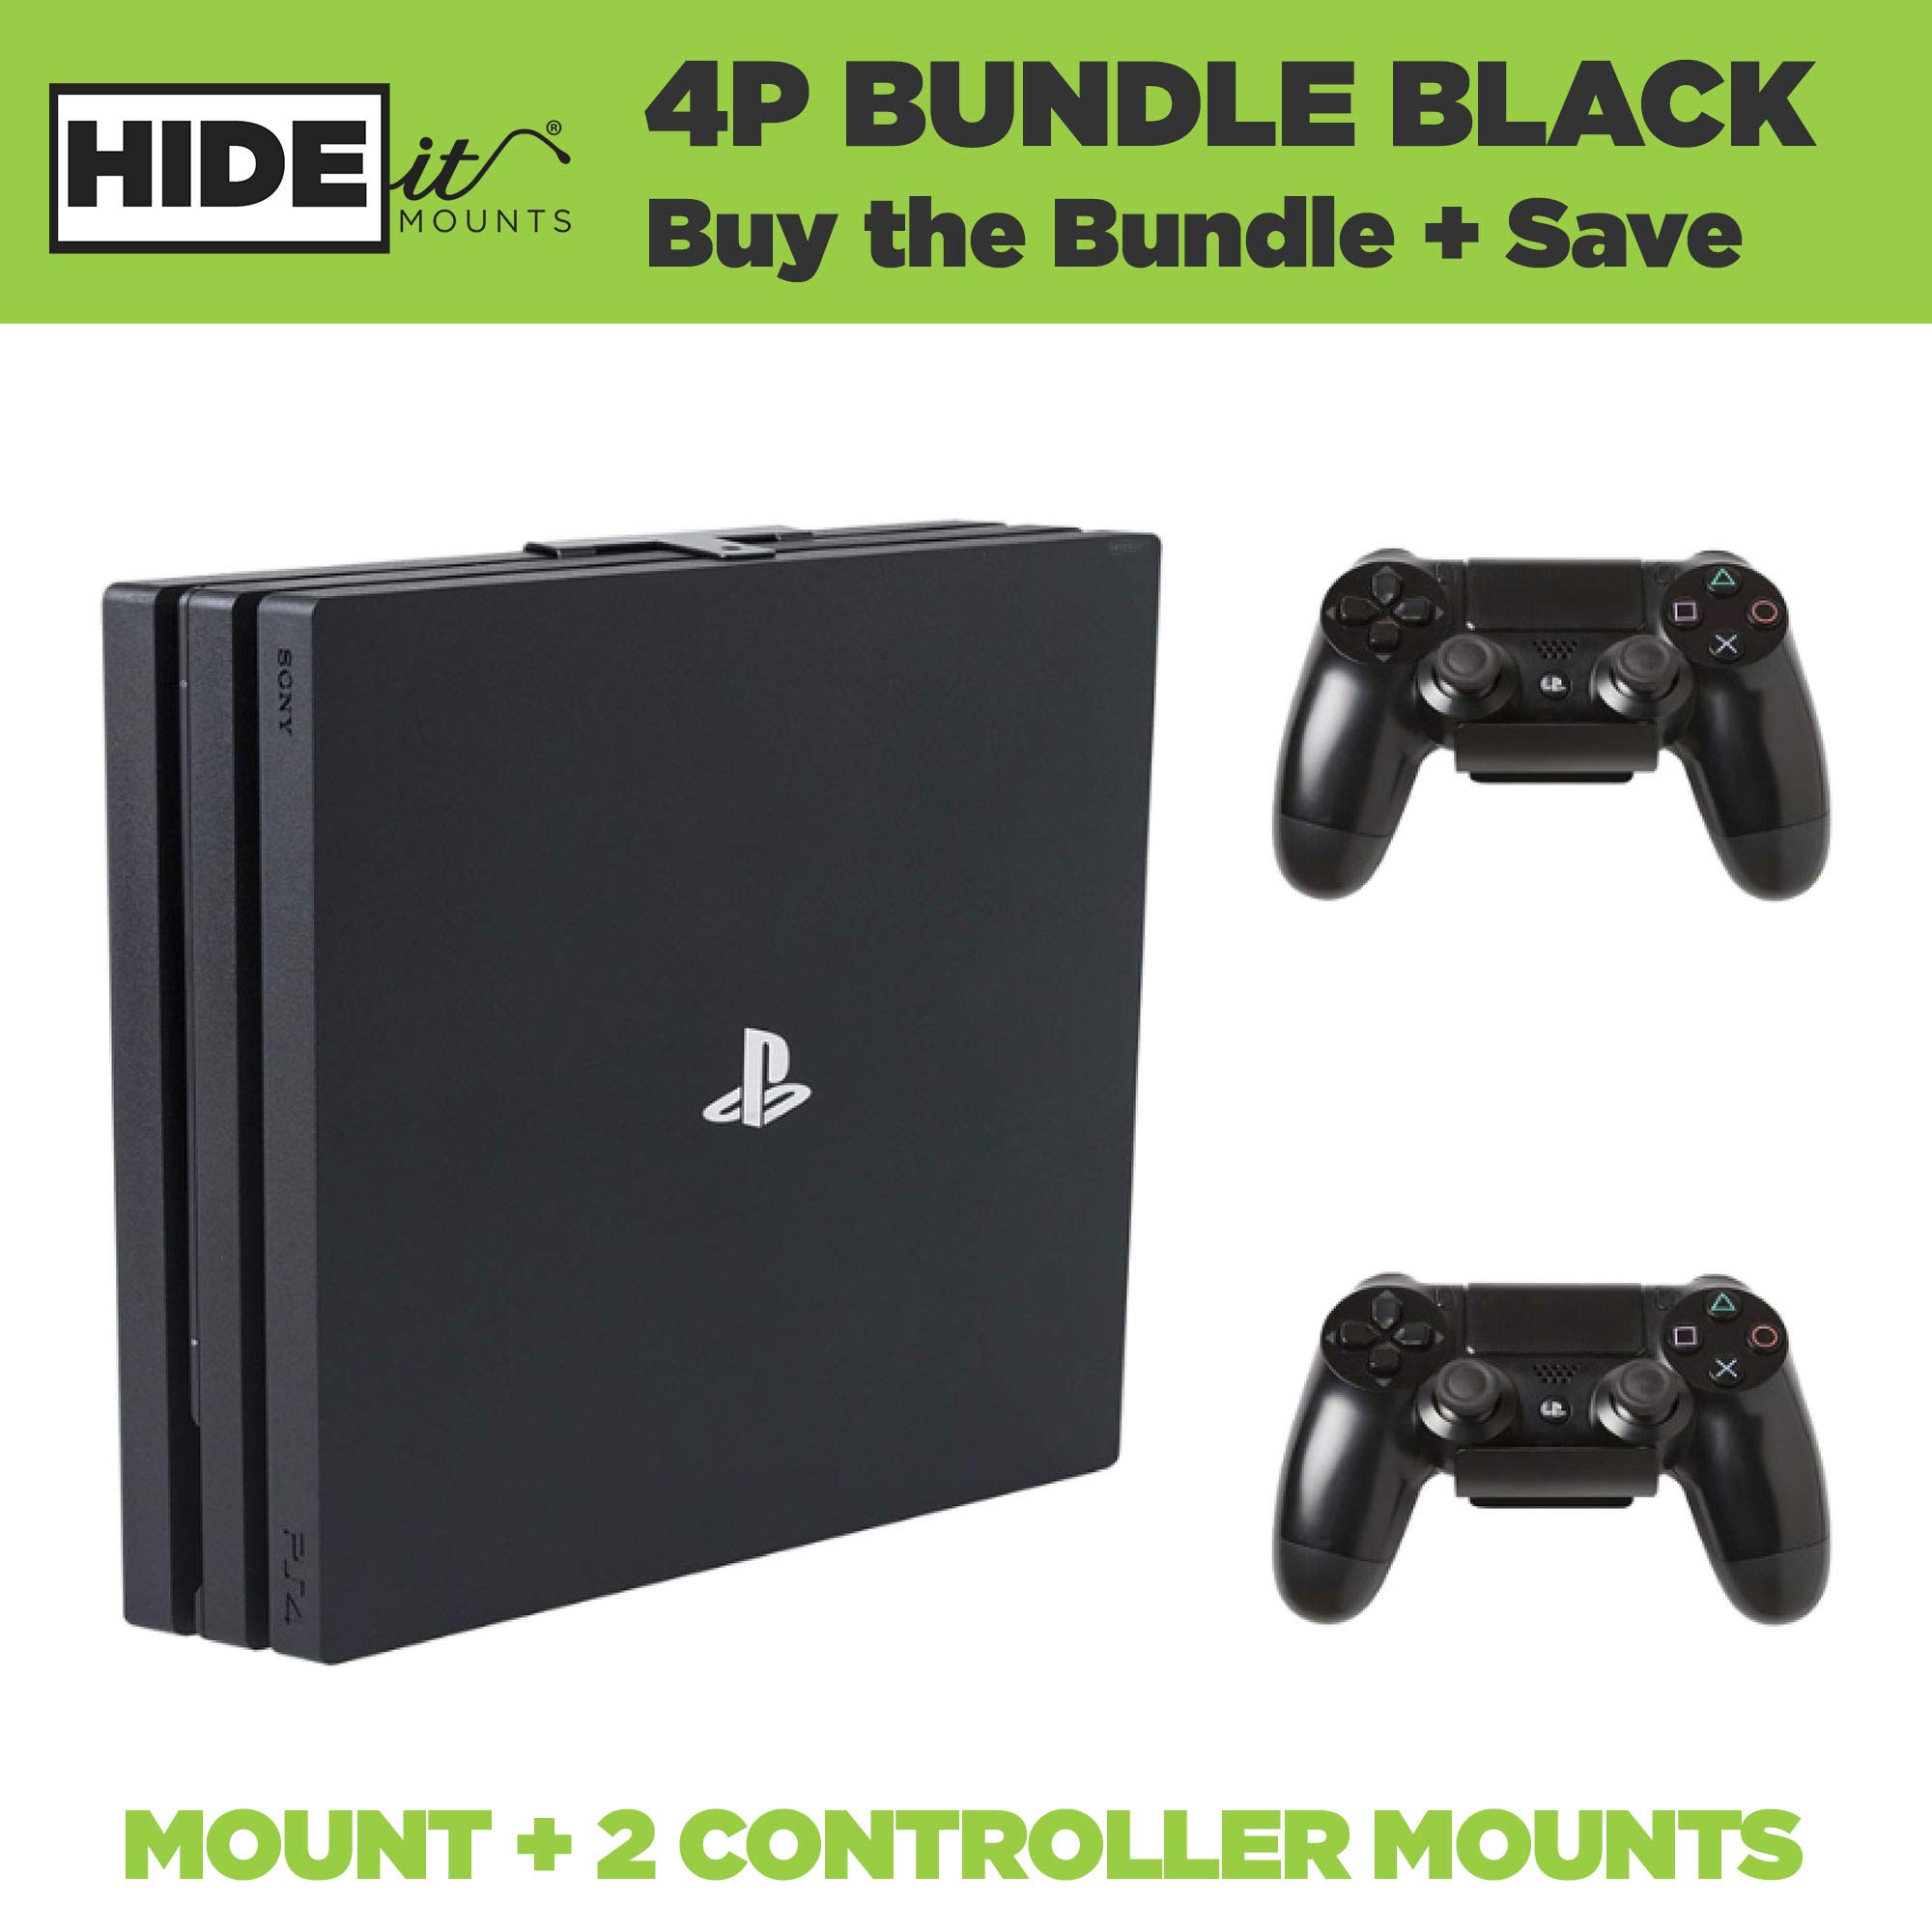 HIDEit Mounts 4P Bundle, Wall Mounts for PS4 Pro and Controller, Steel Wall Mount for PS4 Pro and 2 Controller Mounts to Safely Store Your PS4 Pro and Playstation Controller Near or Behind TV